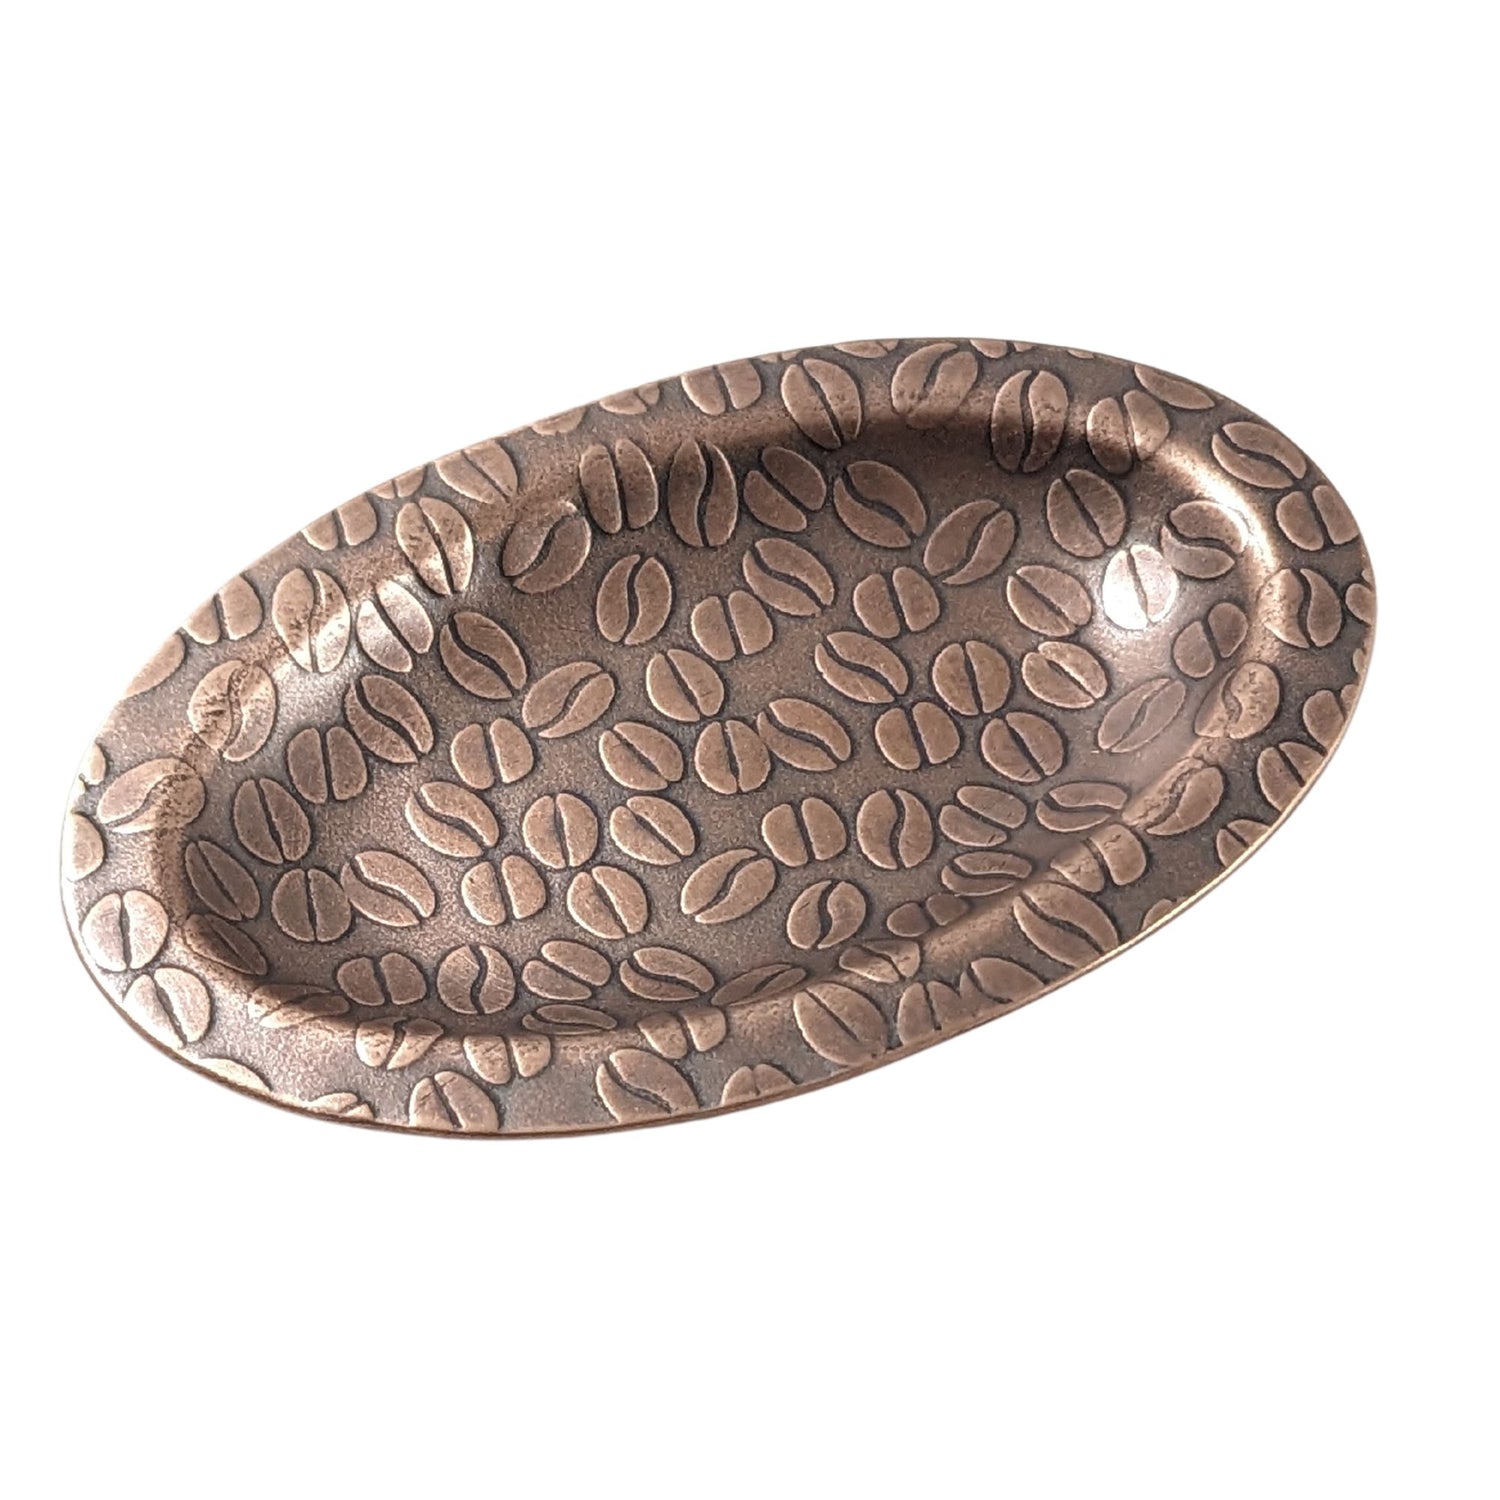 An oval copper ring dish with a raised edge. The dish has an impressed pattern of coffee beans.